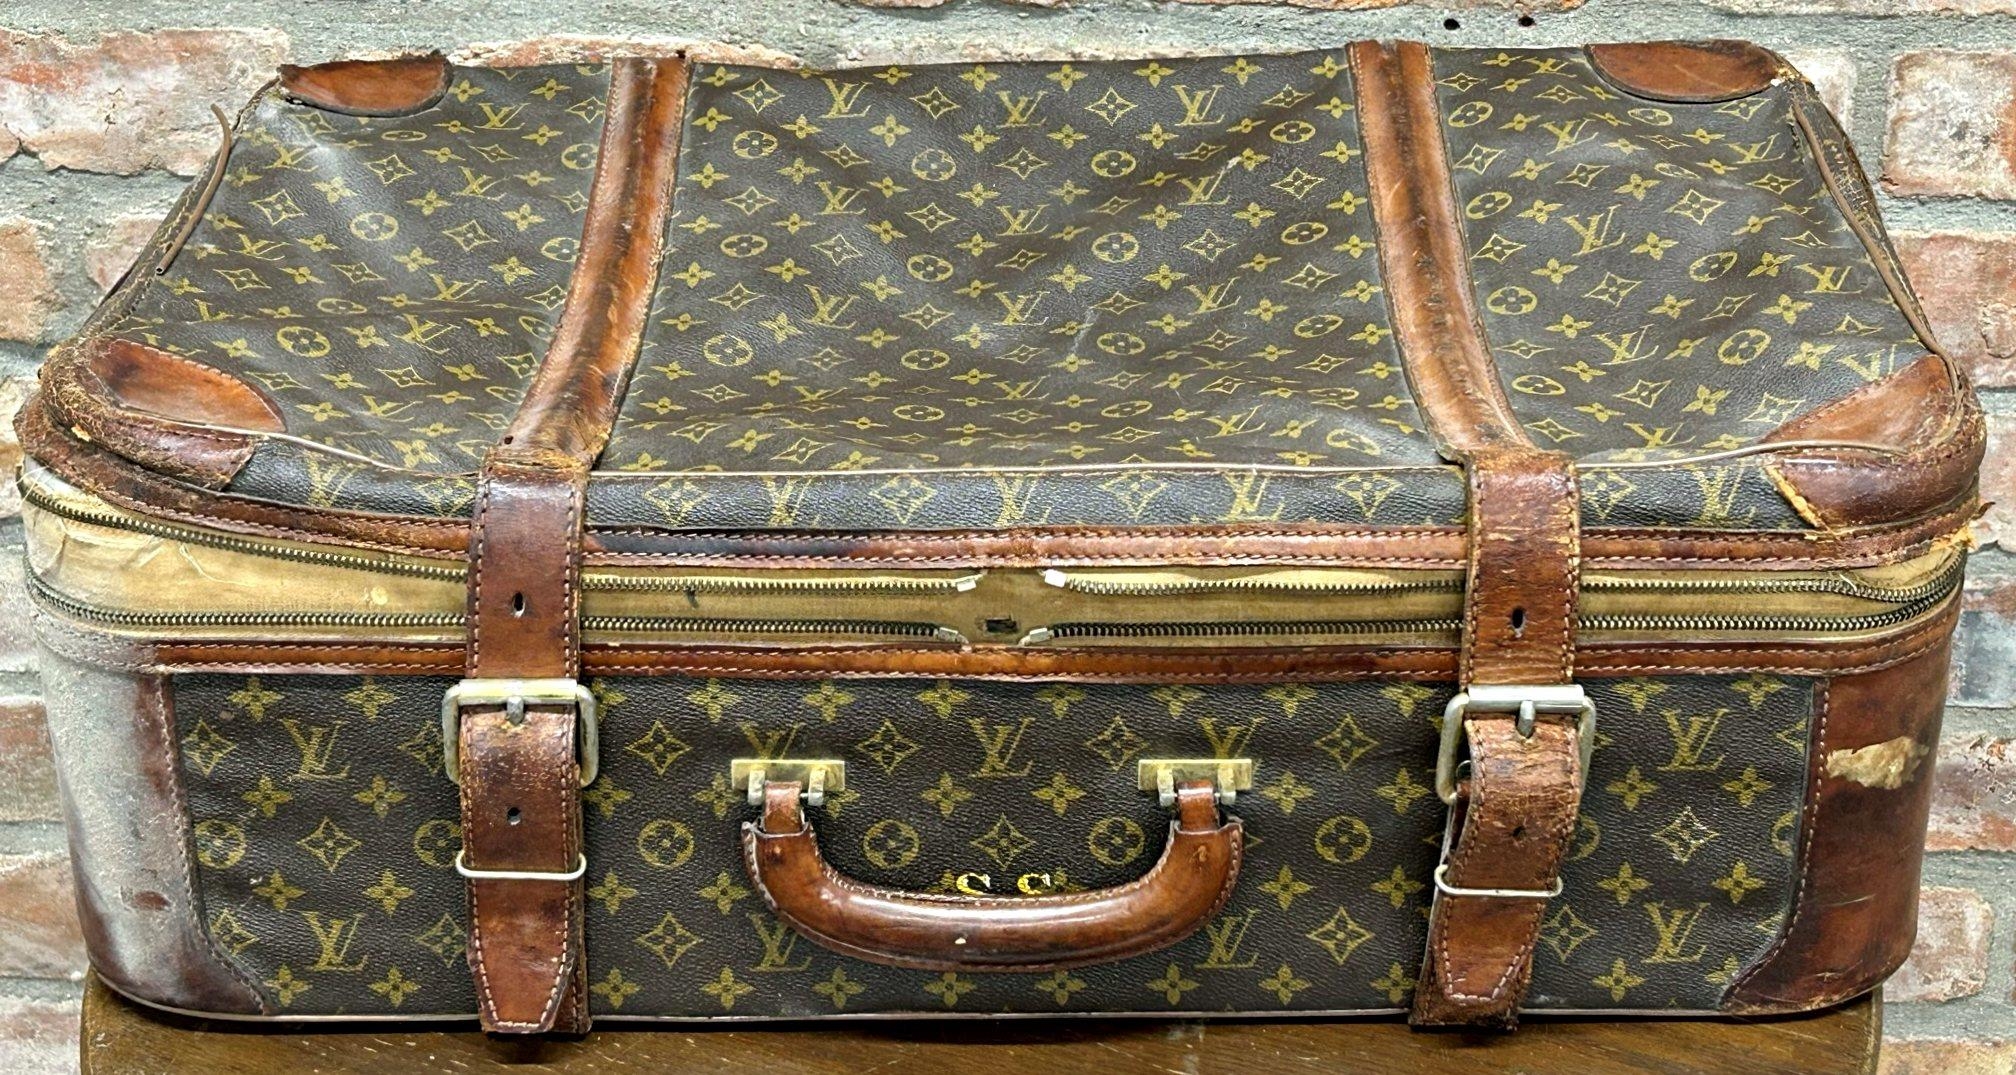 Sold at auction Louis Vuitton Leather and Coated Canvas Hard-side Suitcase  Auction Number 2769T Lot Number 27